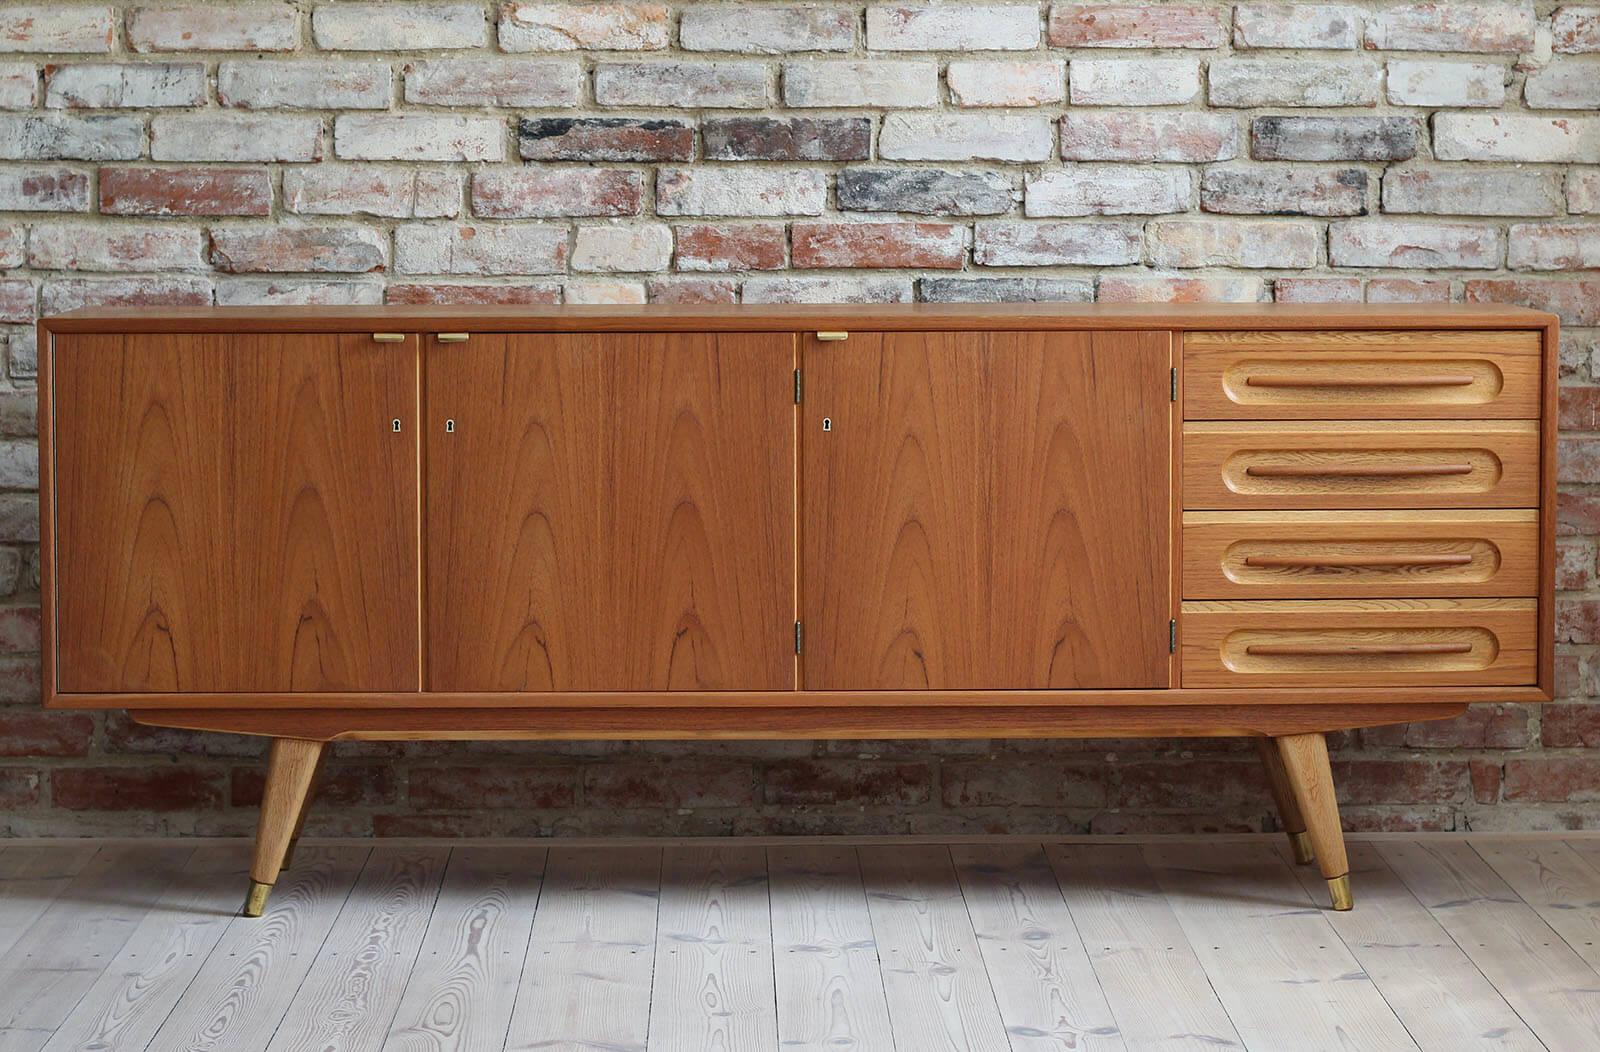 This teak sideboard comes from Denmark and was made around 1960s. It features four storage sections, three of them shelves, each one lockable with a key. The right section features four spacious drawers. Each drawer has beautifully sculpted handle.